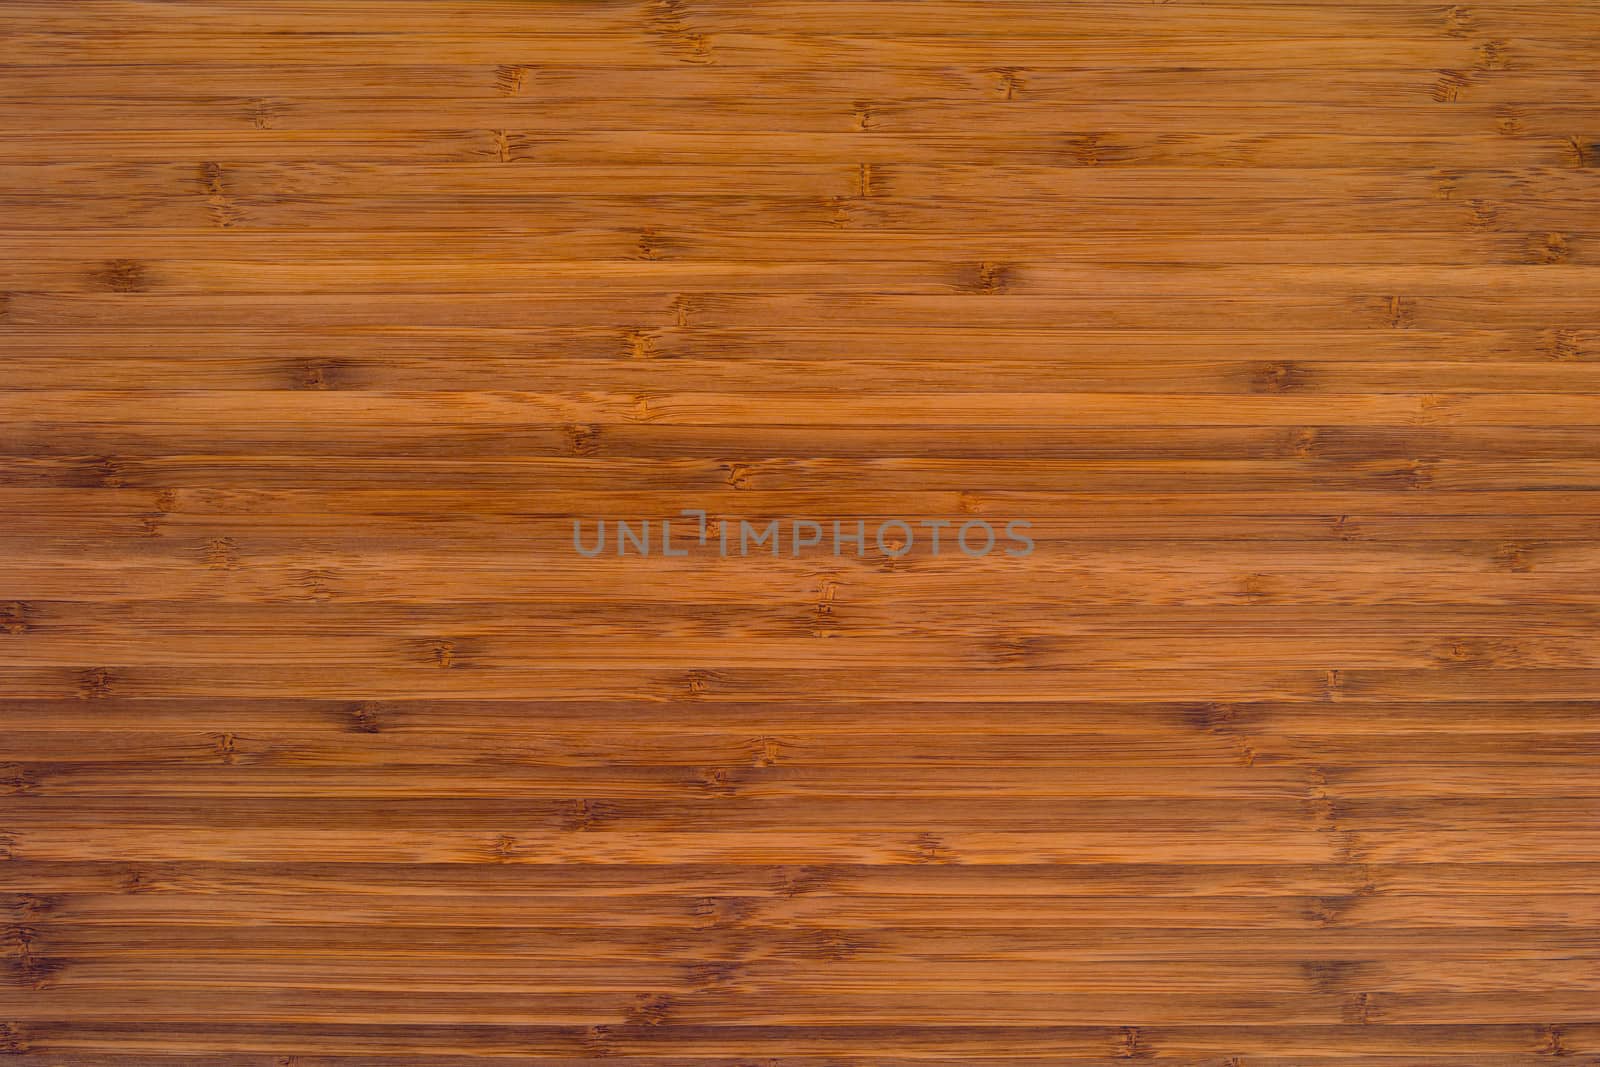 Photo of bamboo wood grain as a background.